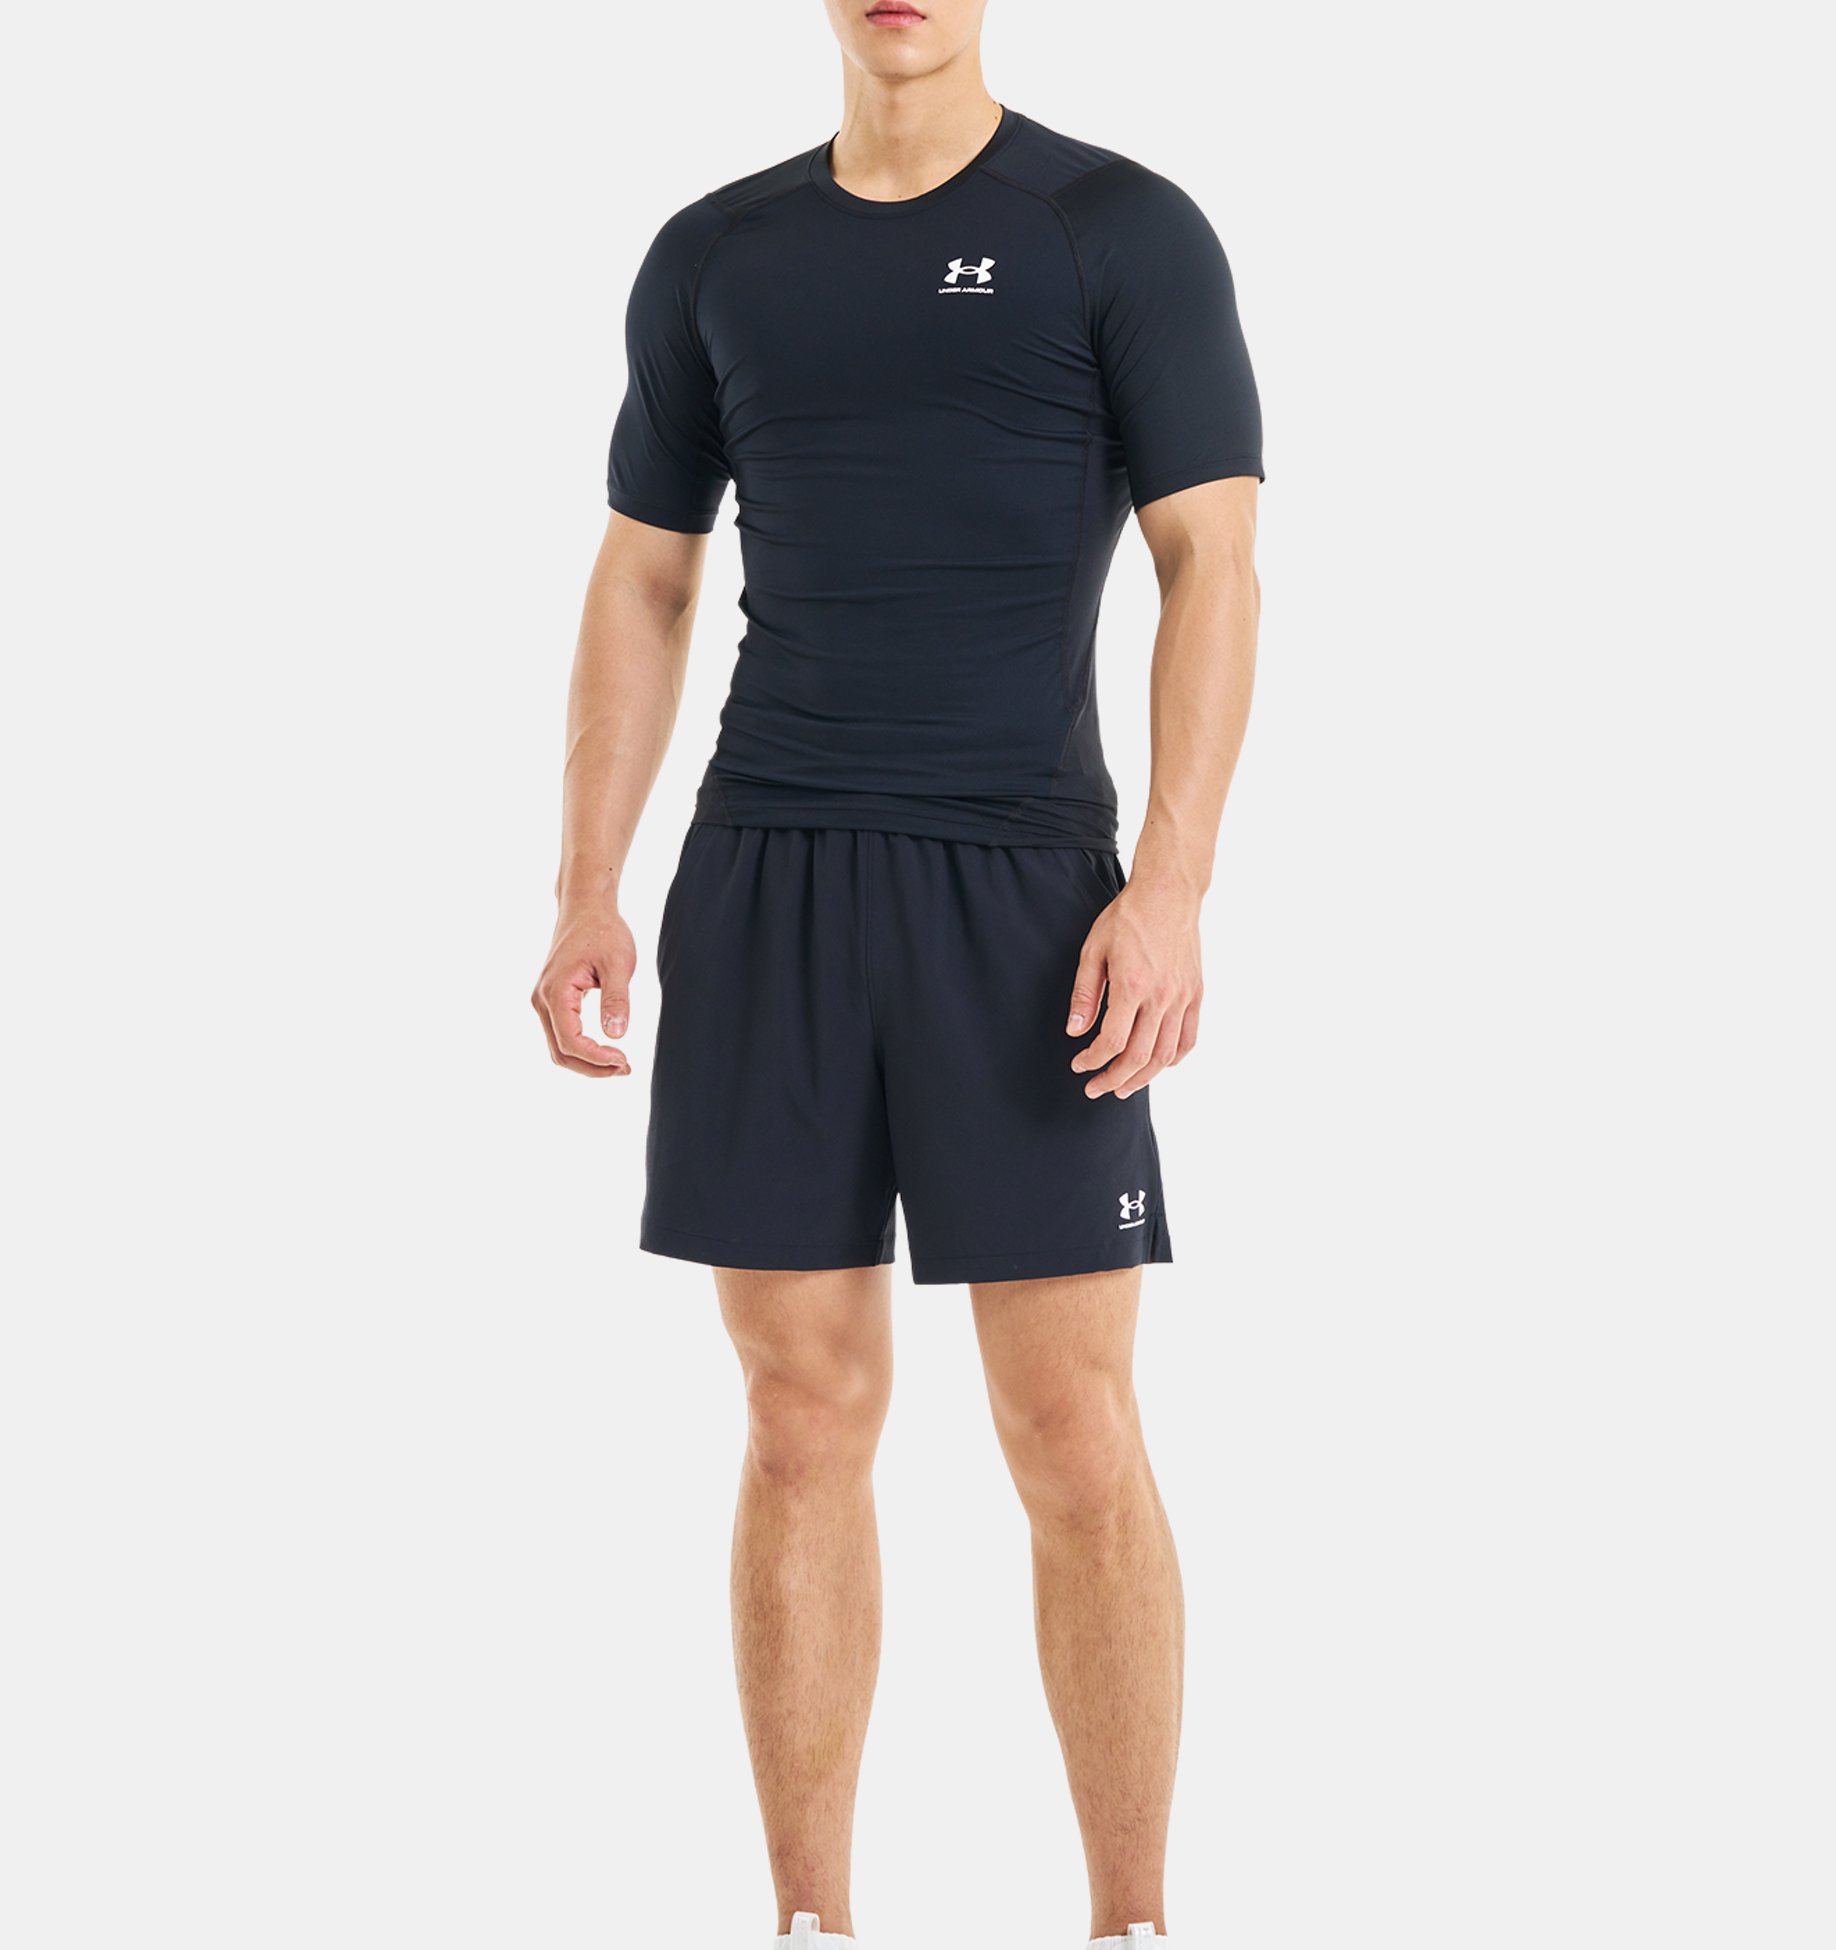  Under Armour Men's Armour HeatGear Fitted Short-Sleeve T-Shirt,  (310) Baroque Green / / White, X-Small : Clothing, Shoes & Jewelry